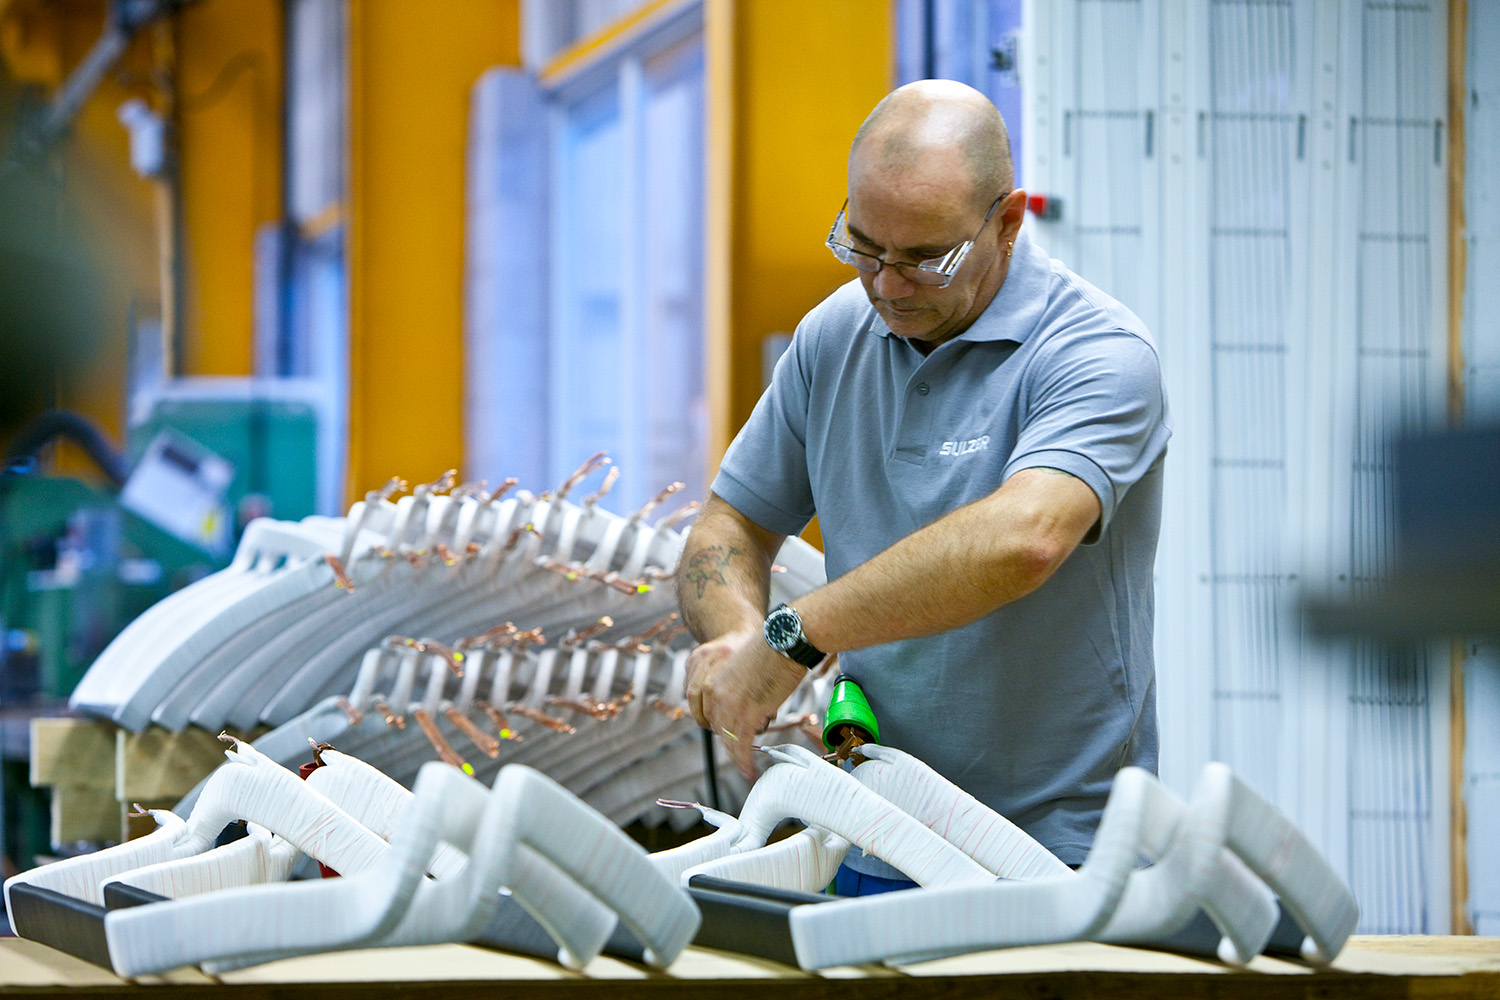 Sulzer’s in-house high-voltage coil shop ensures a fast turnaround on rewind projects